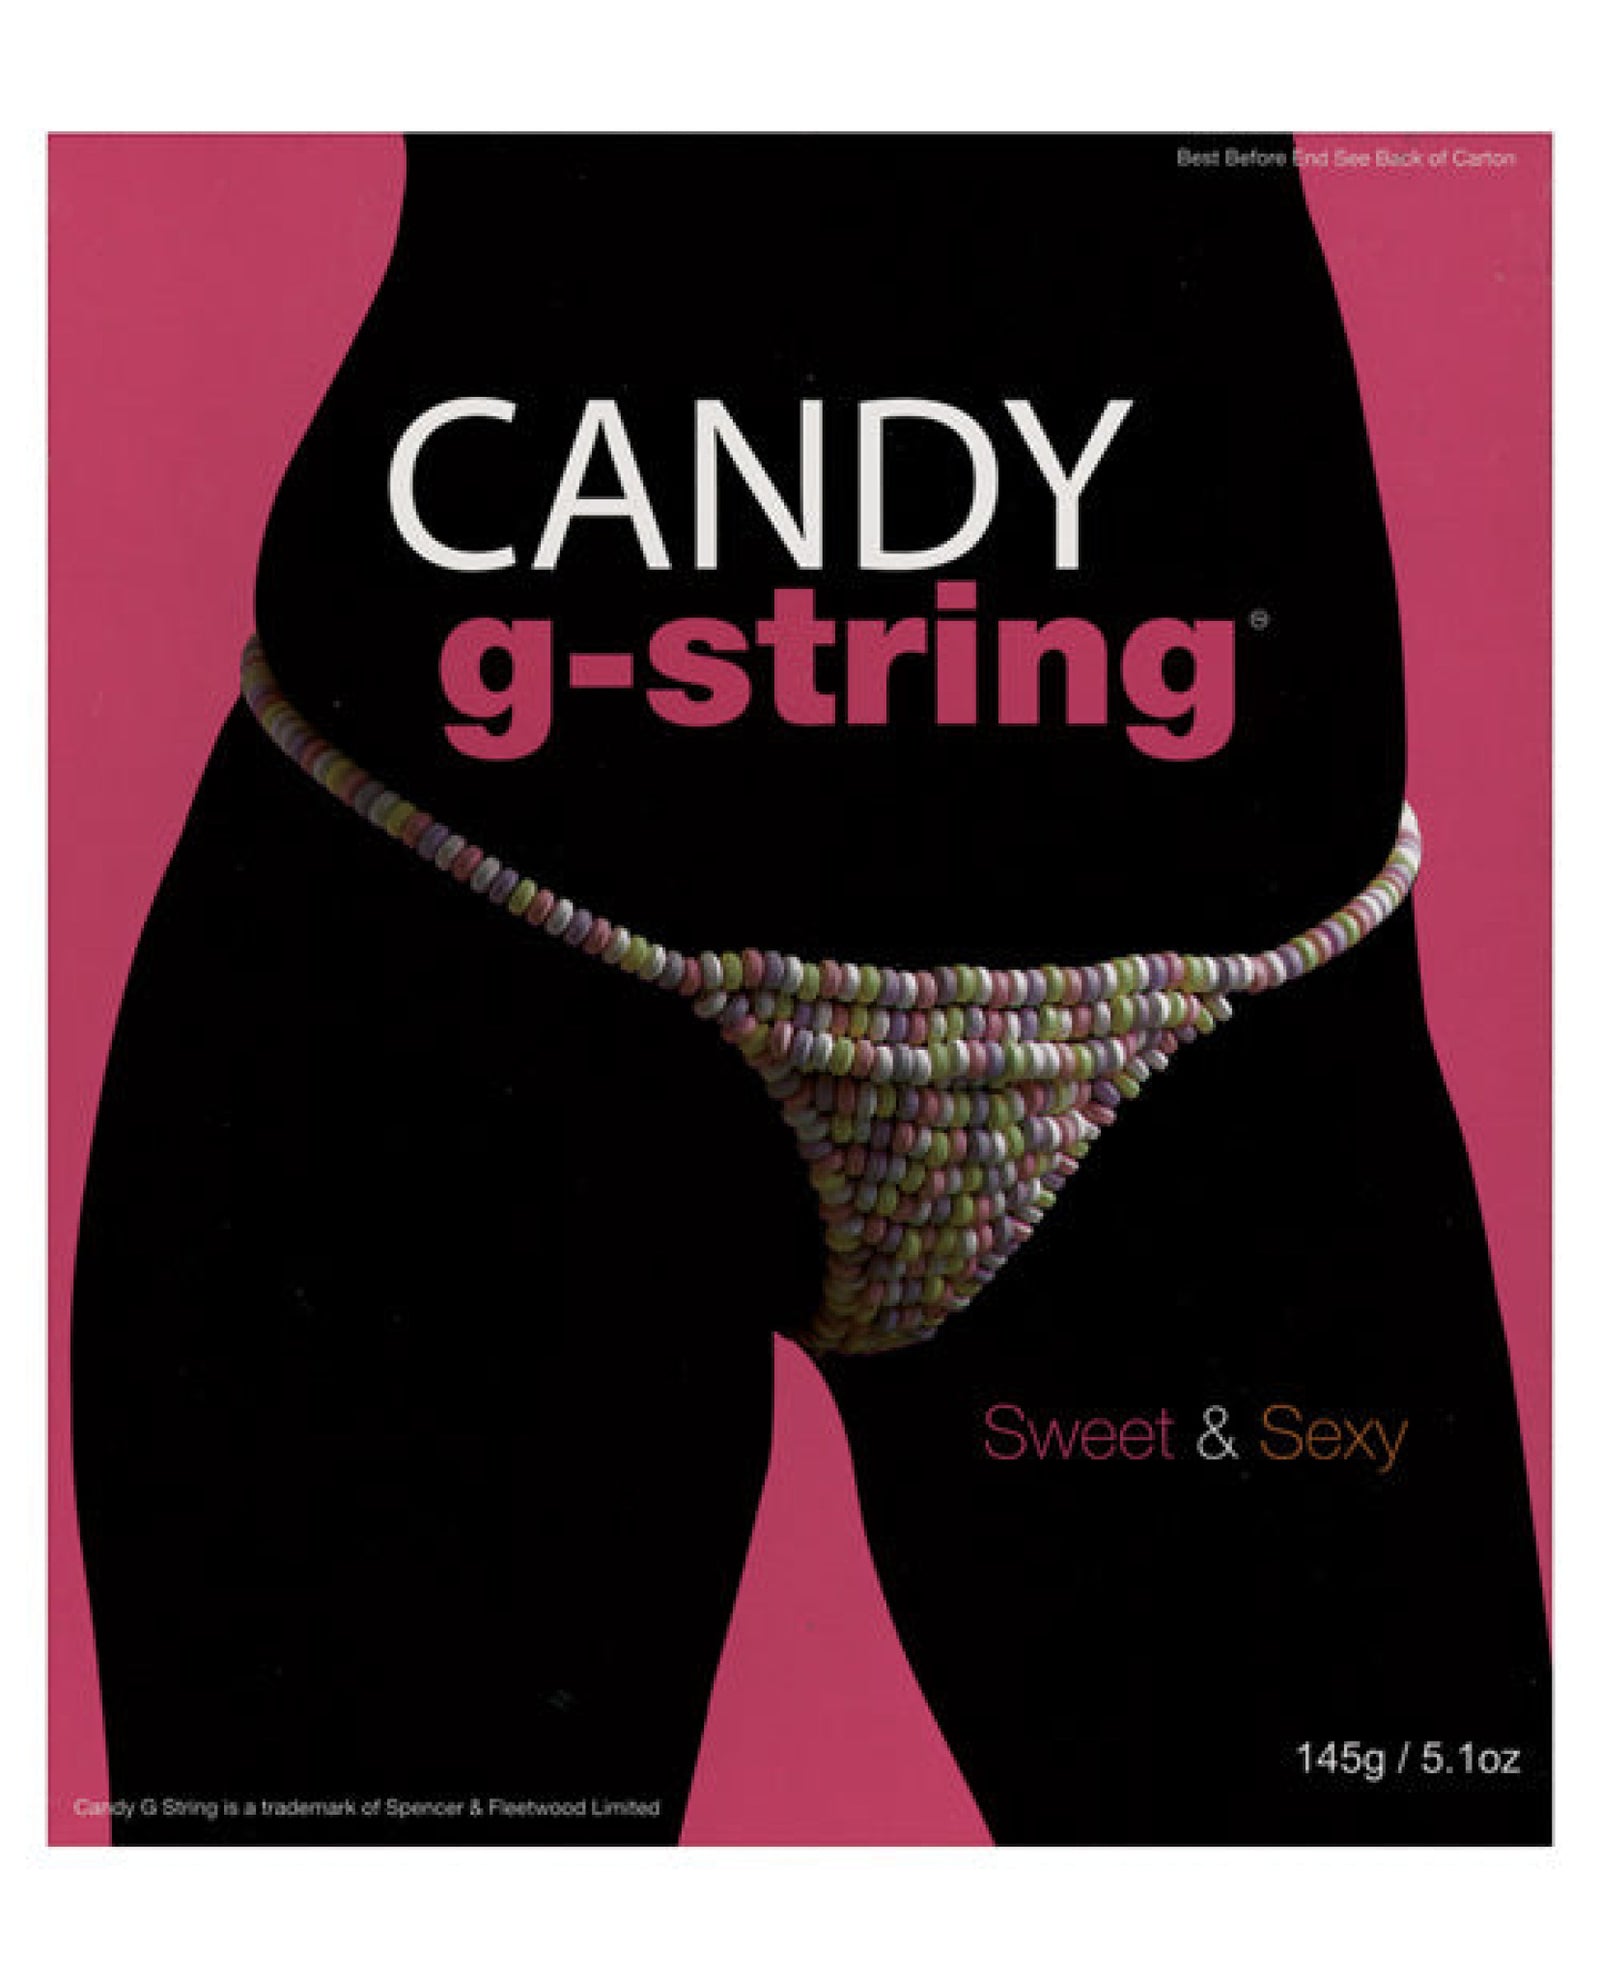 Candy G-string Hott Products